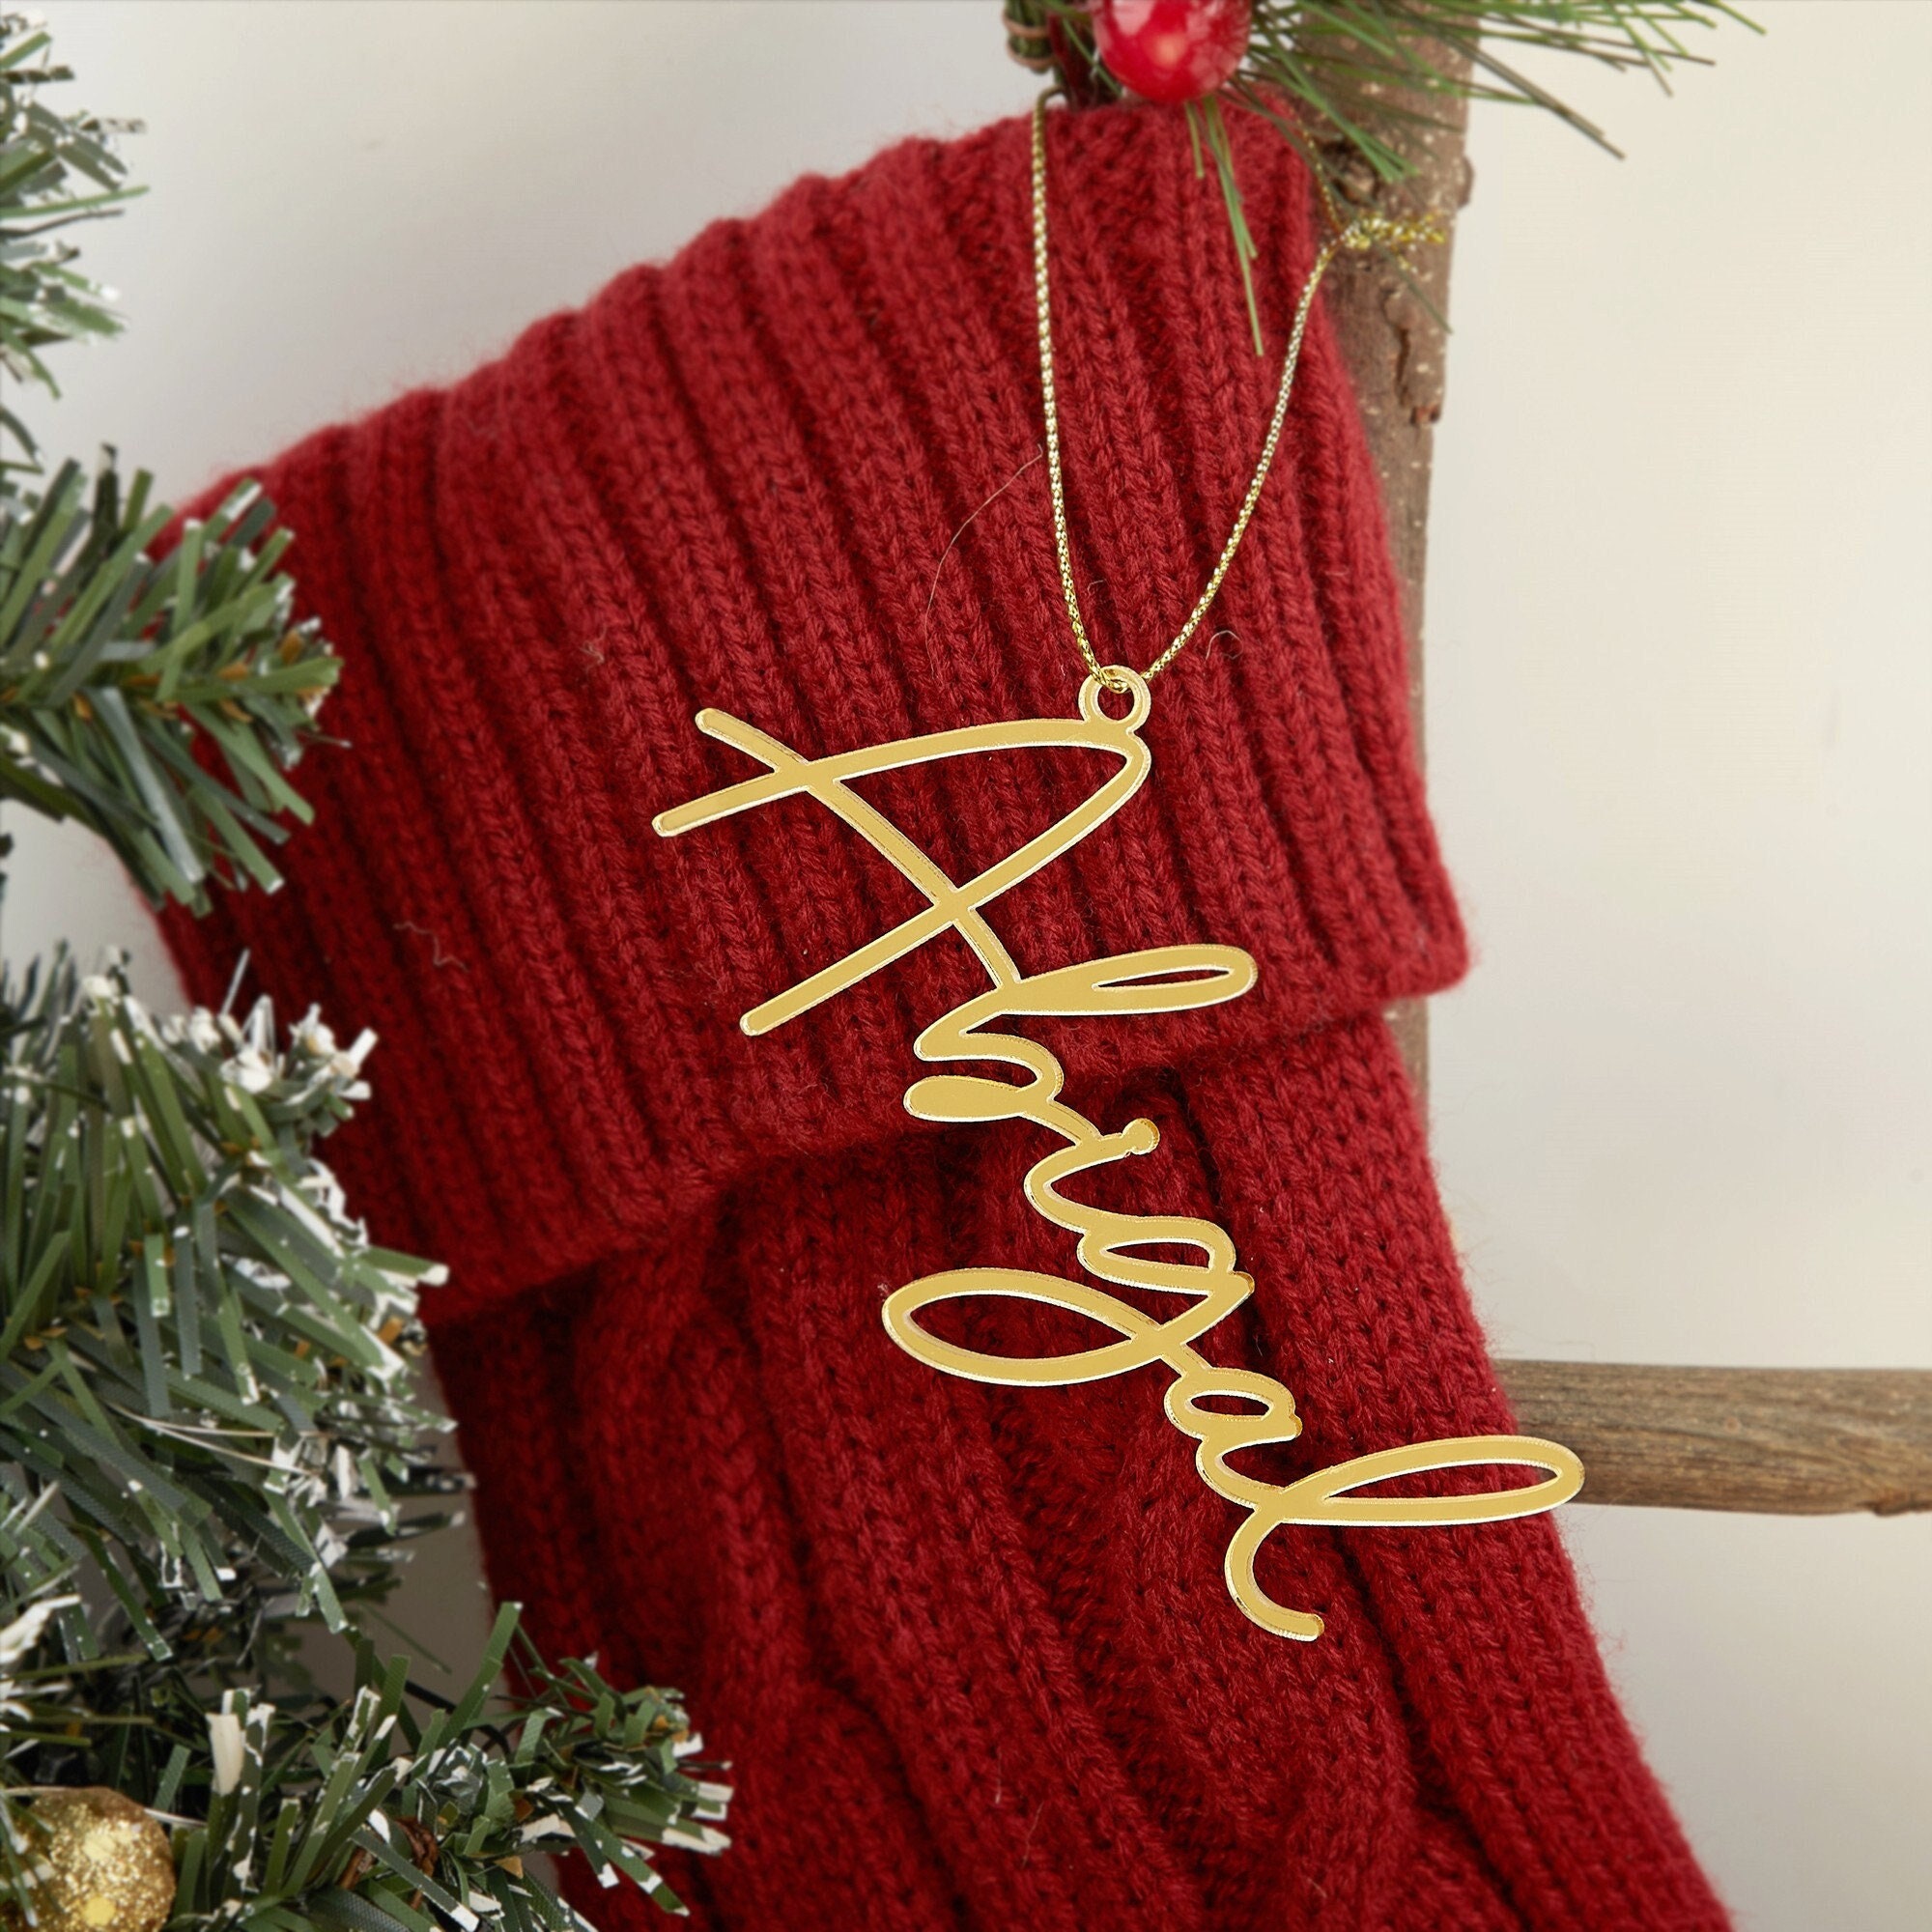 Personalized Christmas Stocking Name Tags - Mirror, Acrylic, Glitter  Acrylic or Wood Name Tags for Stockings